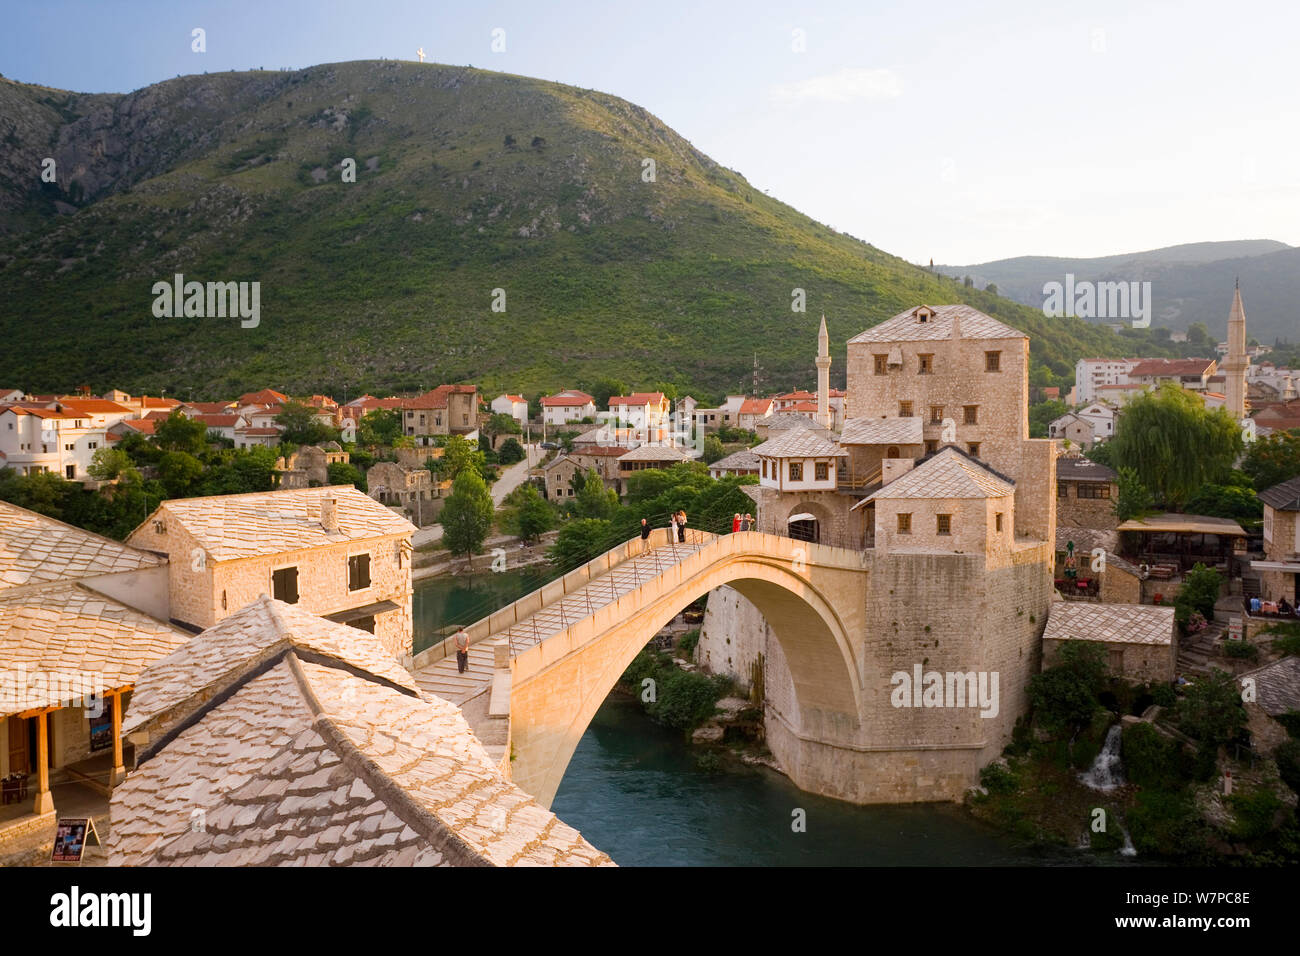 The famous 'Old Bridge' of Mostar built in 1566 was destroyed in 1993, the 'New Old Bridge' as it is known was completed in 2004, Old Town, Mostar, Herzegovina, Bosnia and Herzegovina, Balkans, 2007 Stock Photo